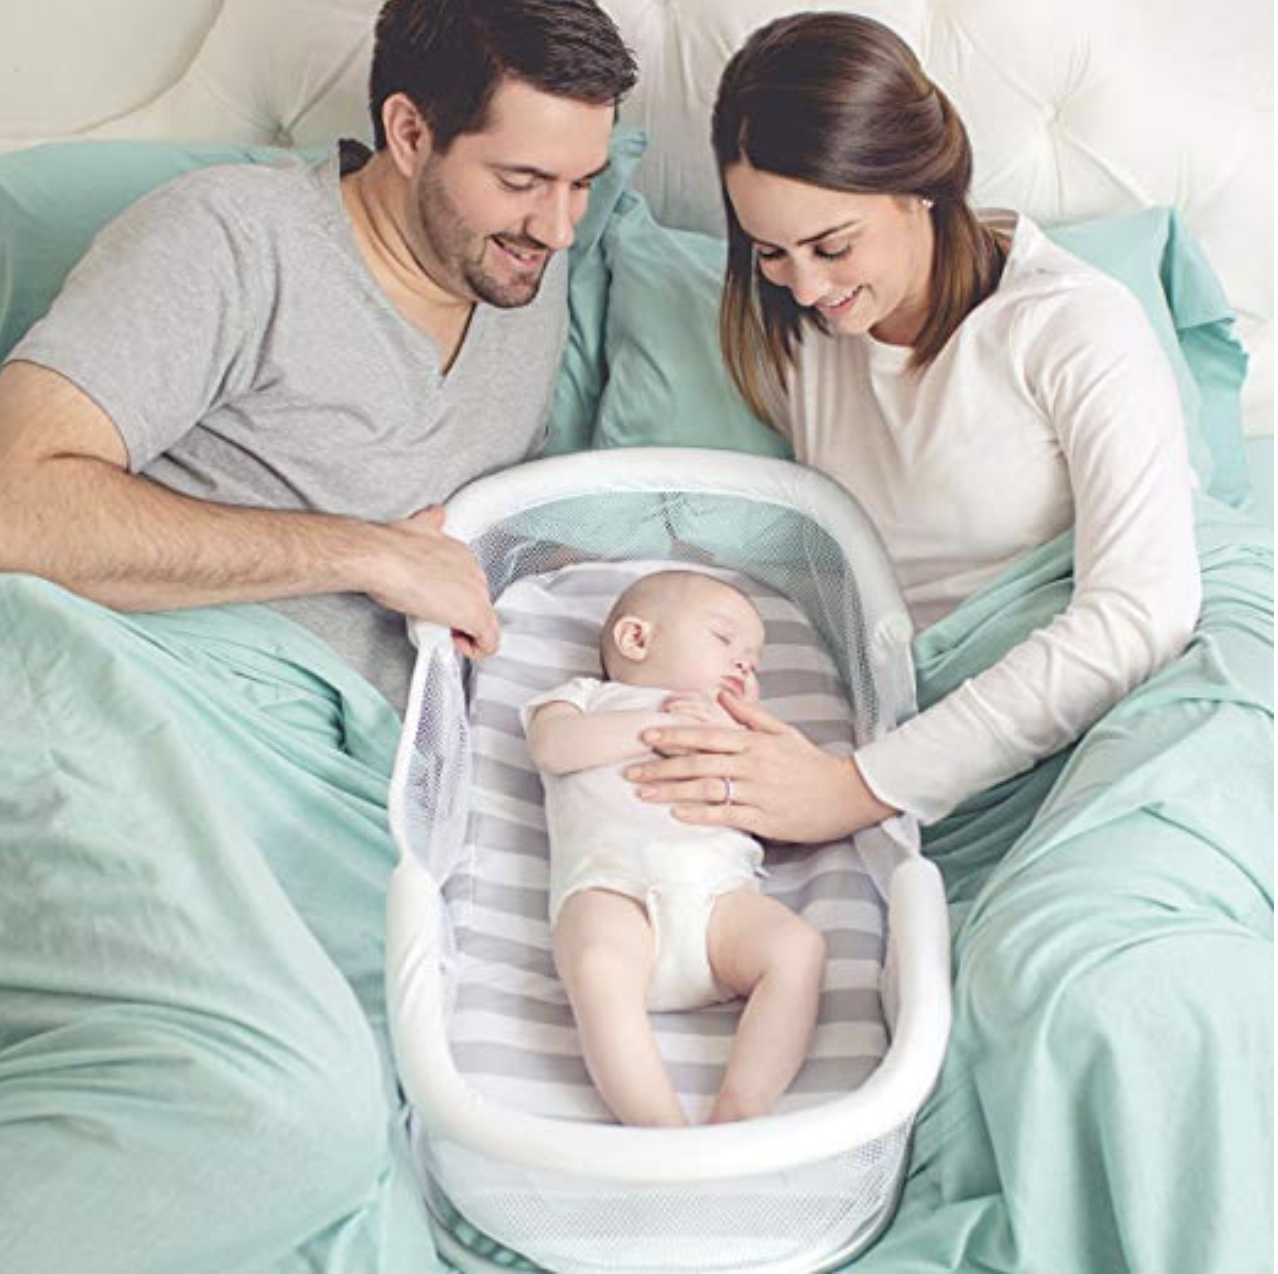 In bed co-sleepers are a good alternative to cot beds